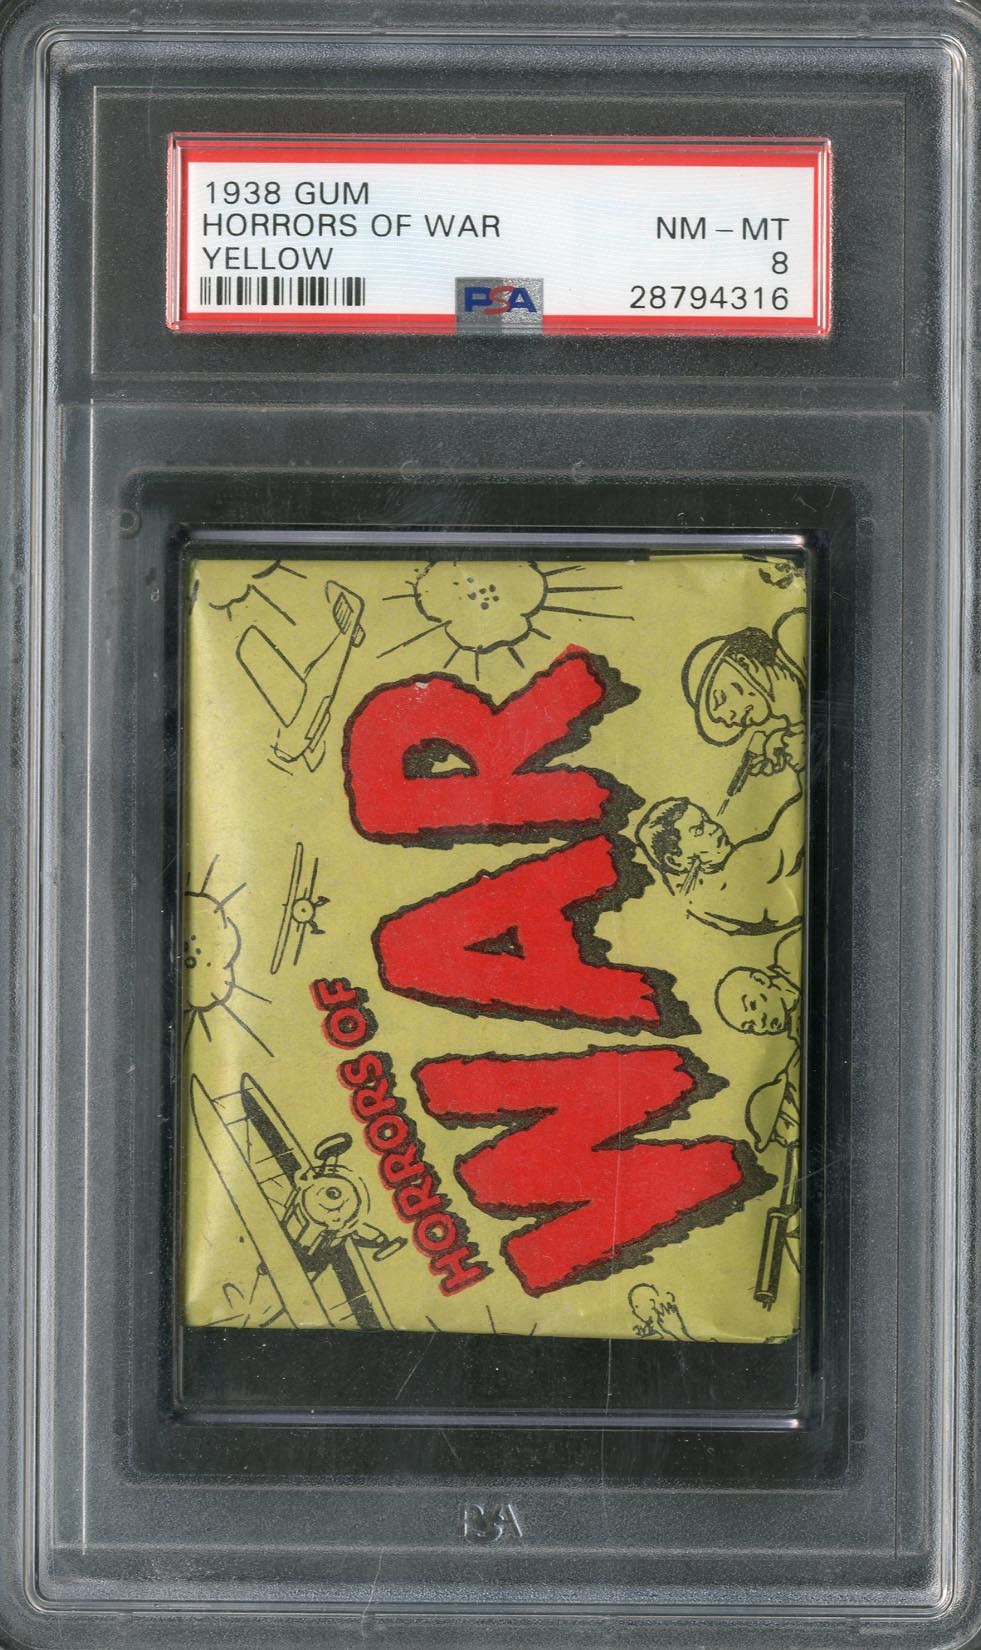 - 1938 Gum Inc. Horrors of War Unopened Wax Pack (PSA 8, only one higher)